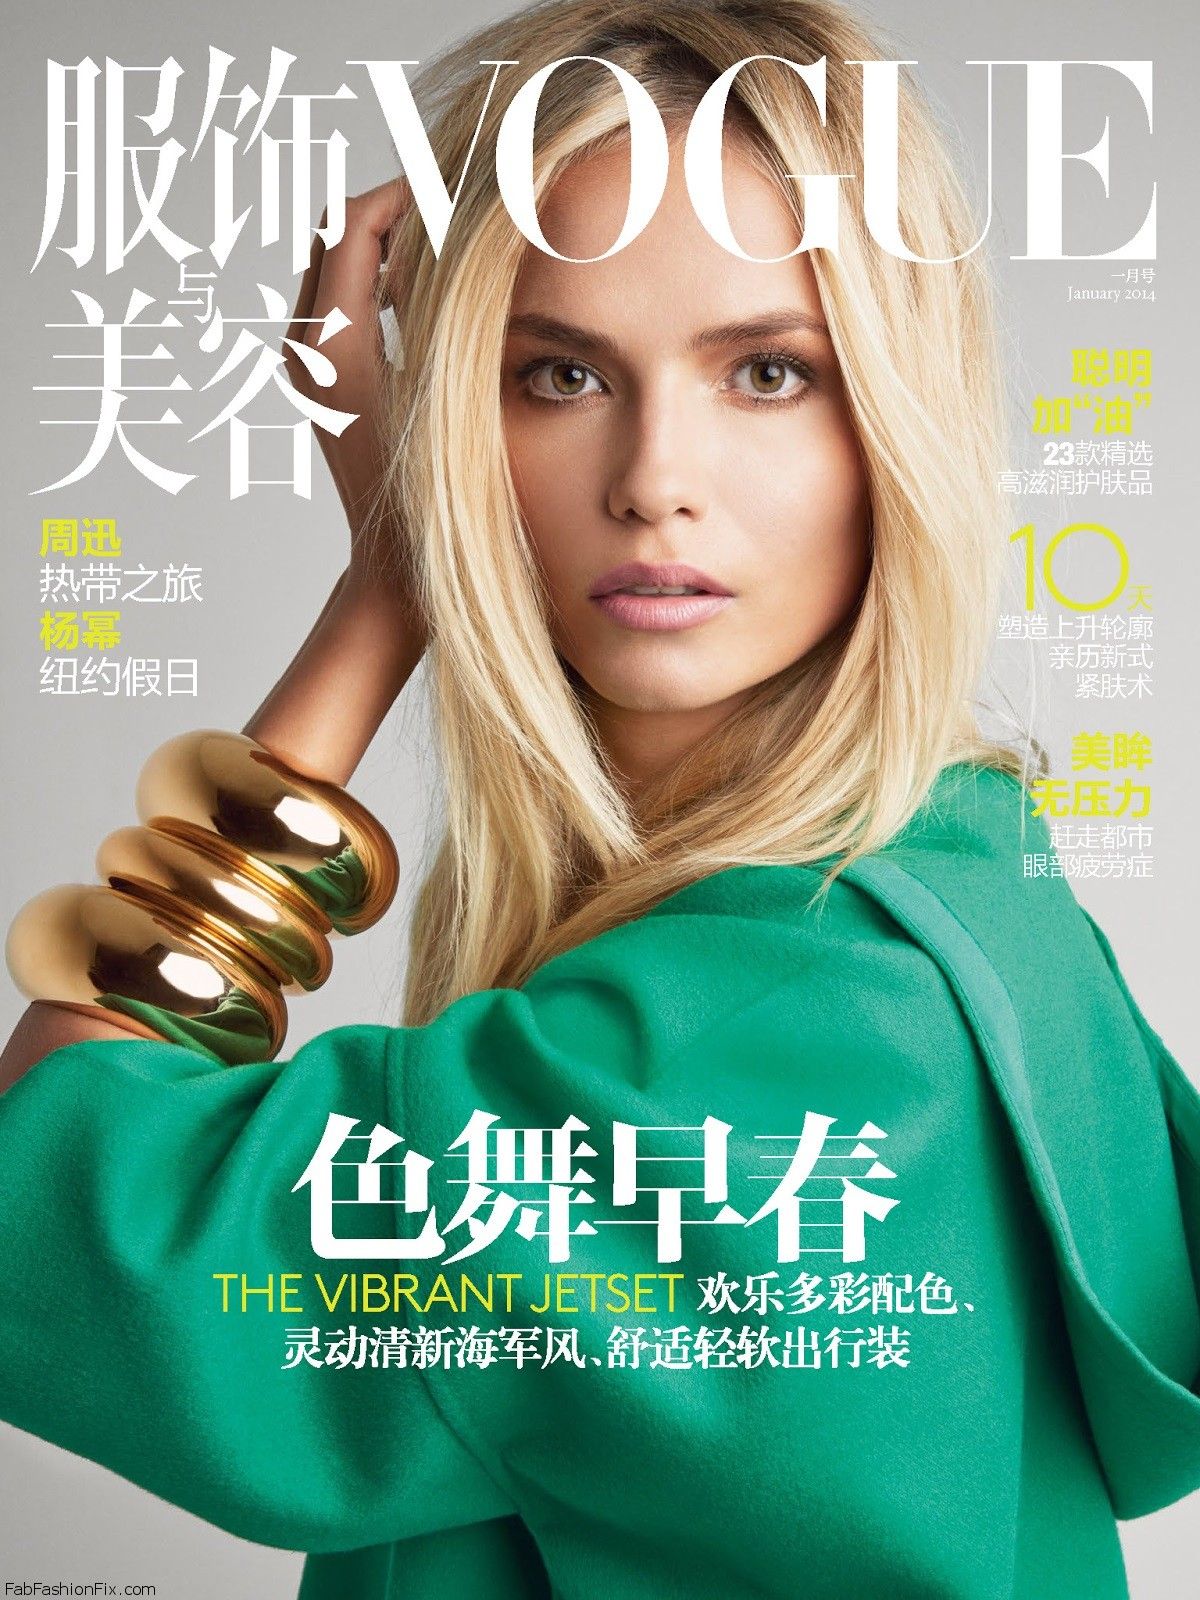 Natasha Poly by Patrick Demarchelier for Vogue China January 2014 (Colour Me Happy) (0)-cover